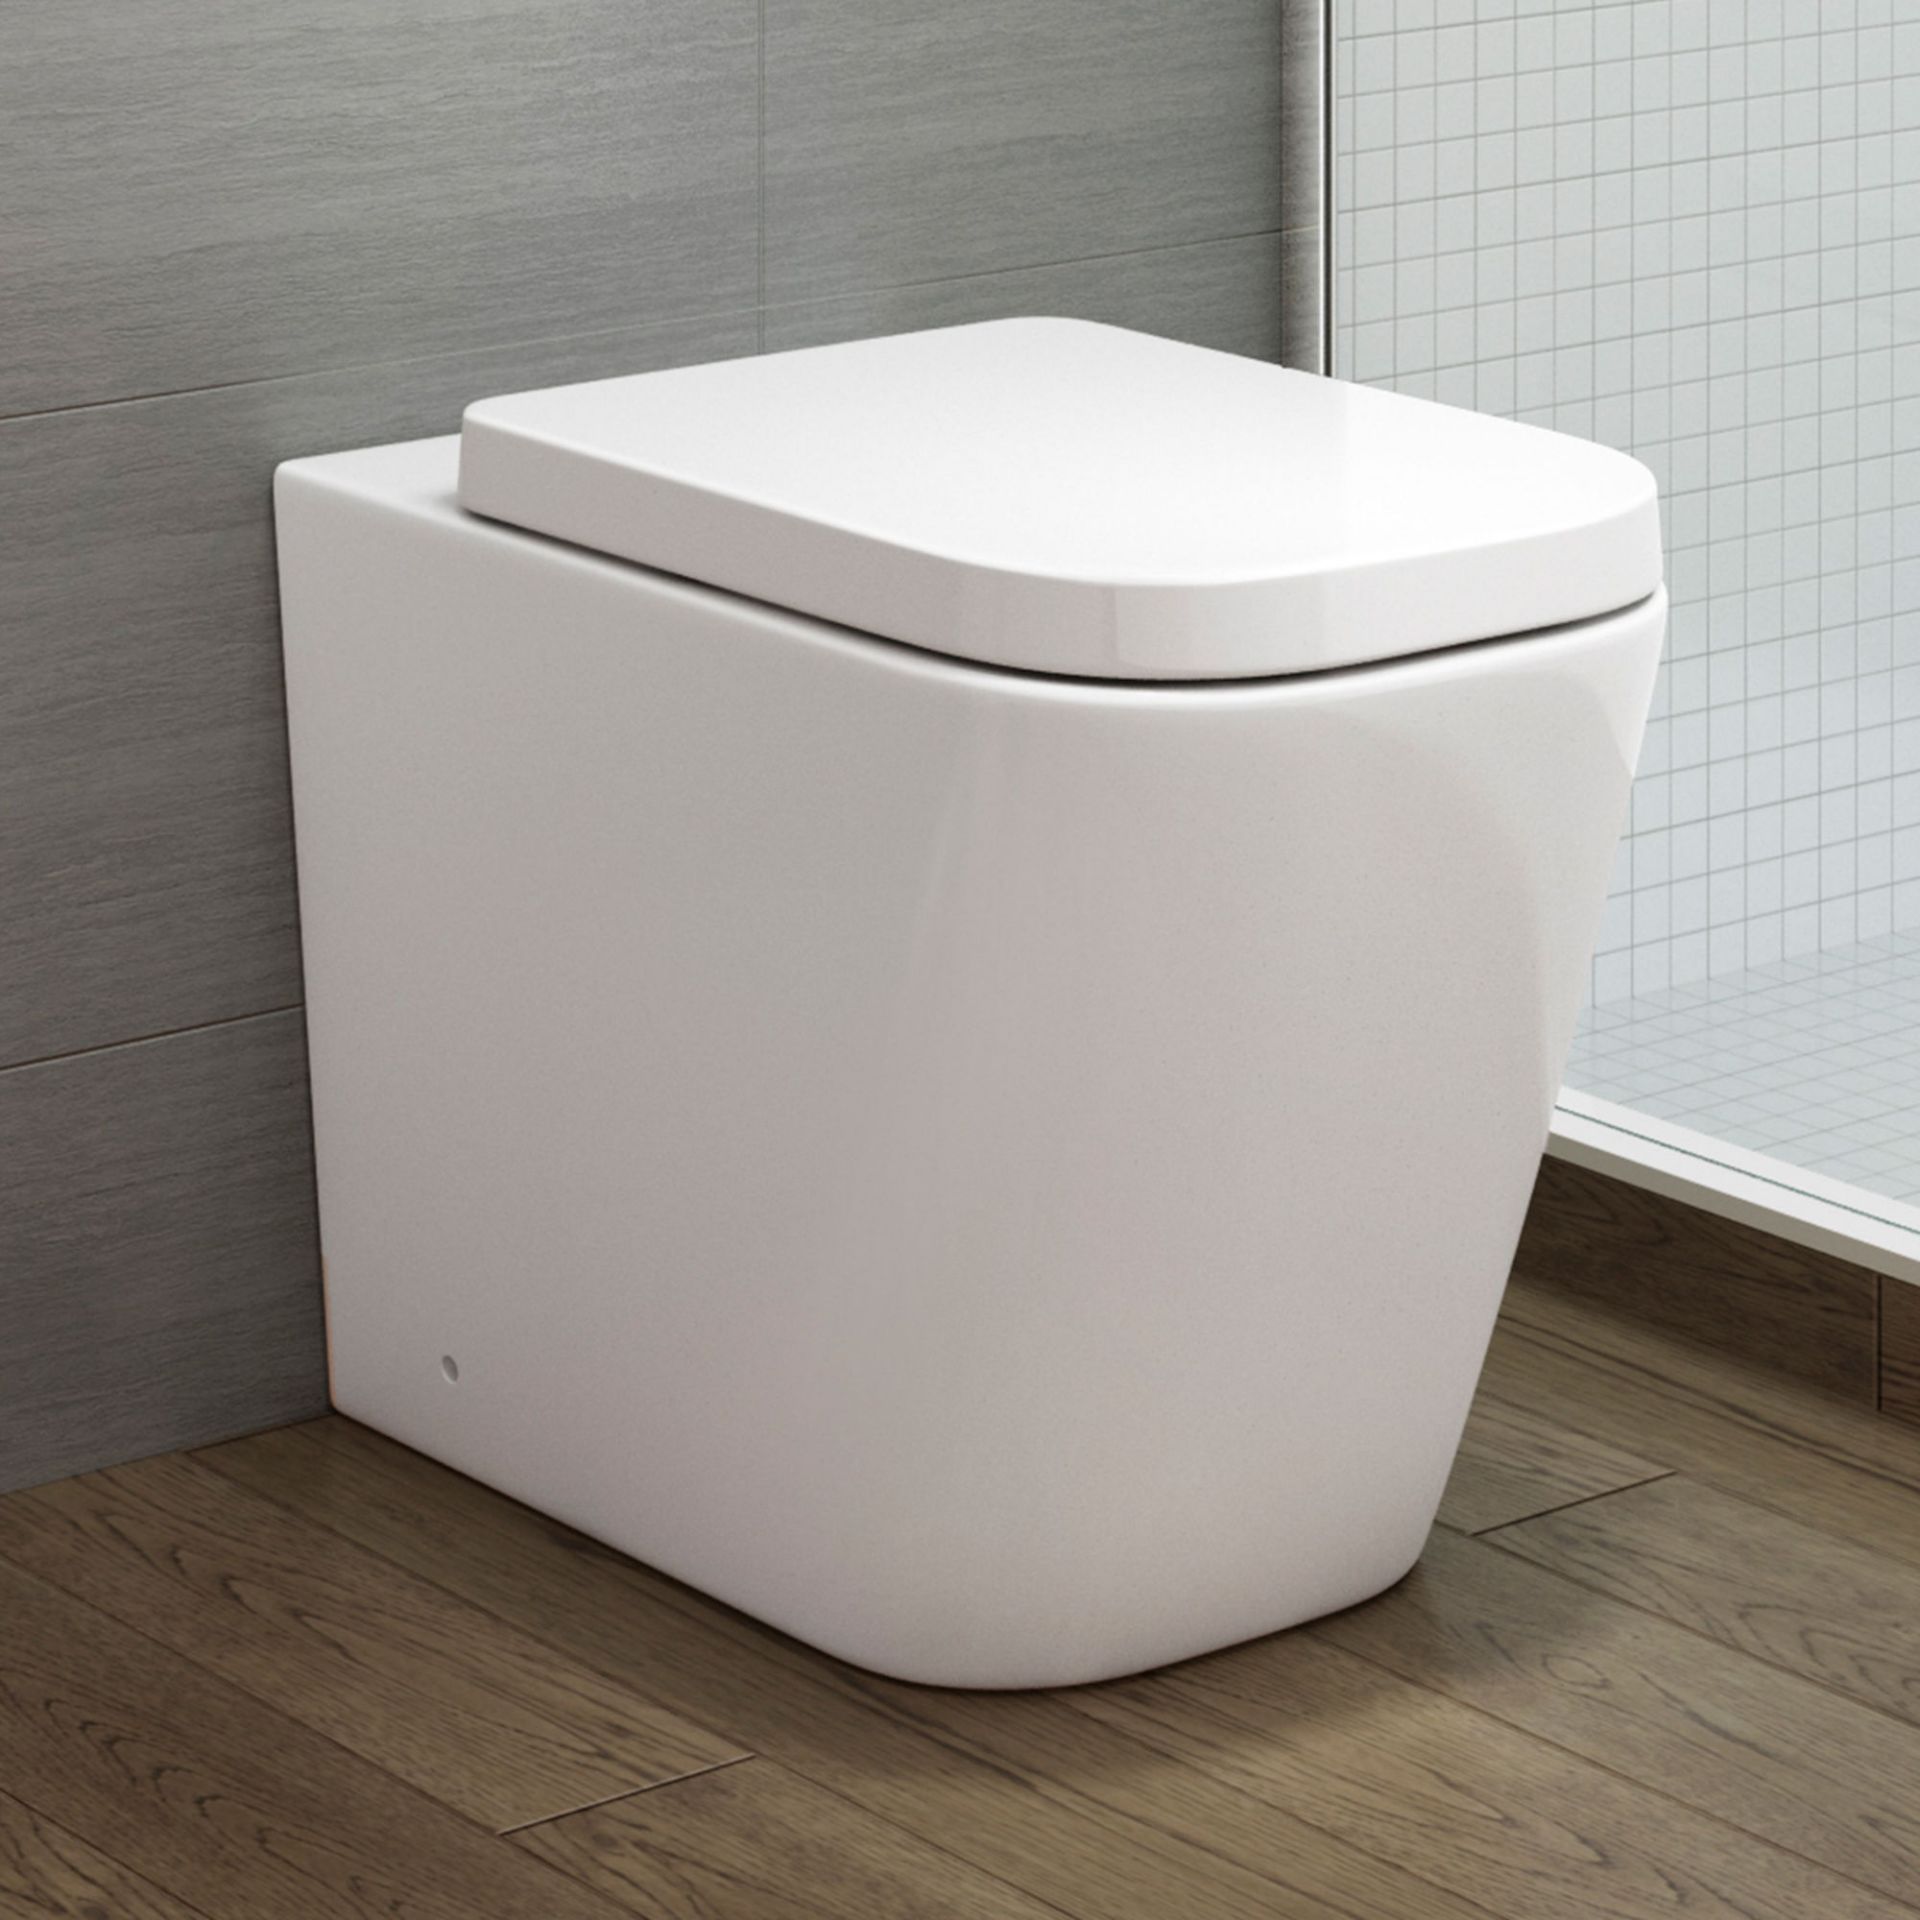 New Florence Rimless Back To Wall Toilet Inc Luxury Soft Close Seat. Rimless Design Makes It E...